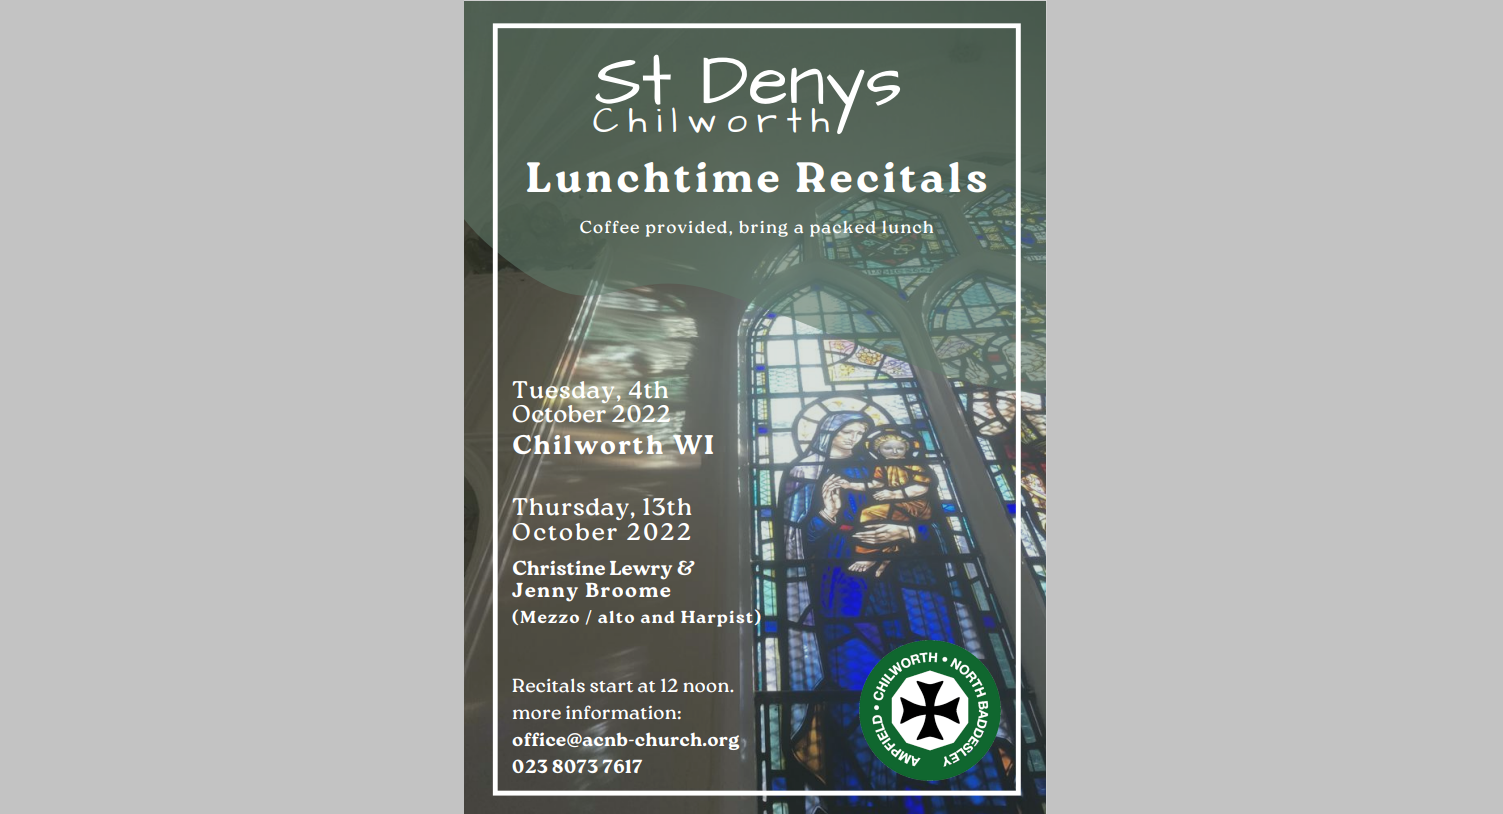 October lunchtime recitals at St Denys